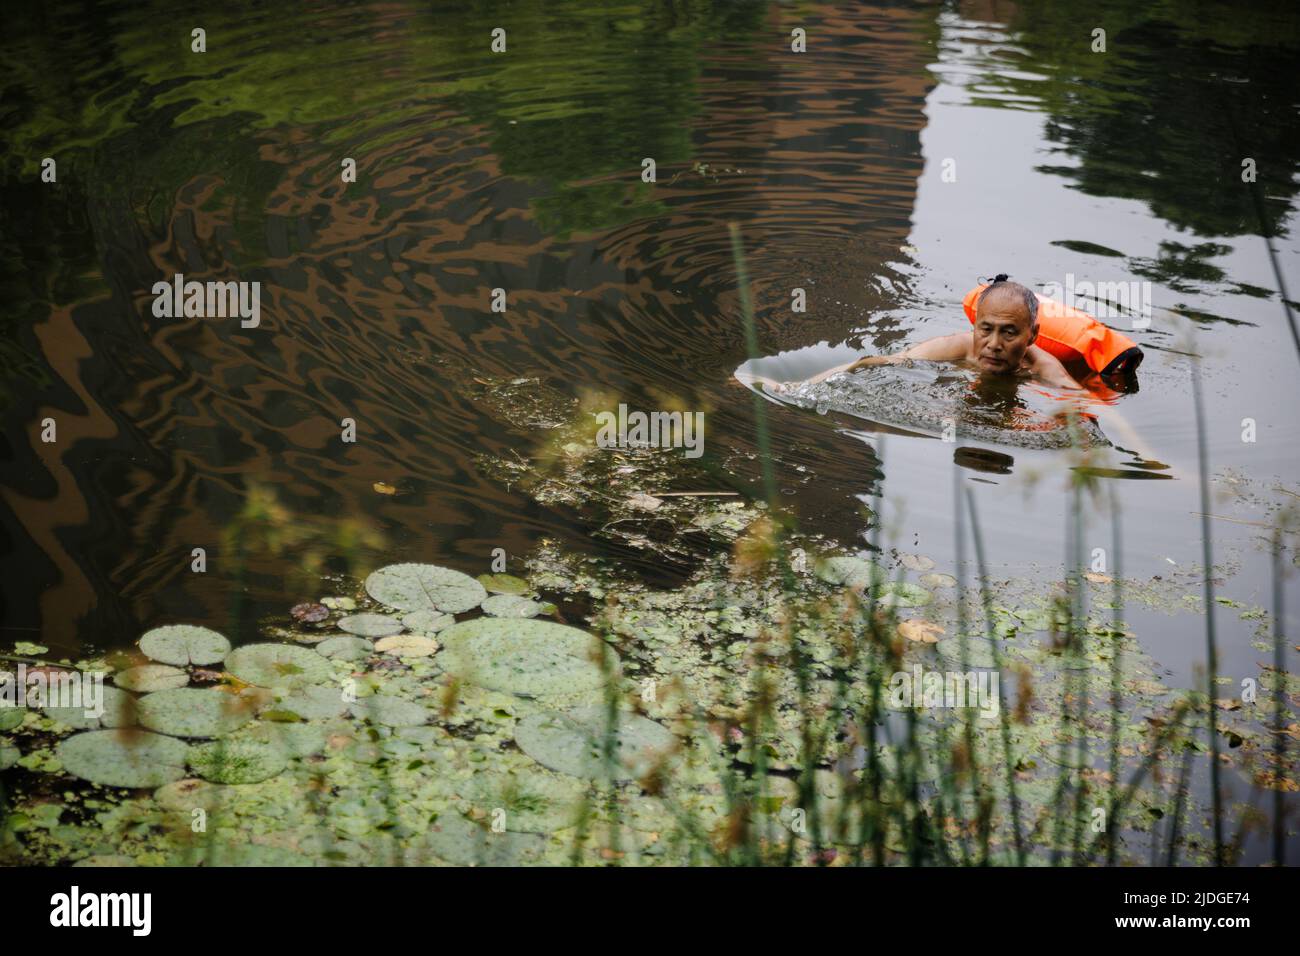 A man swims in a canal on a hot day on Summer Solstice in Beijing, China, June 21, 2022.  REUTERS/Thomas Peter Stock Photo